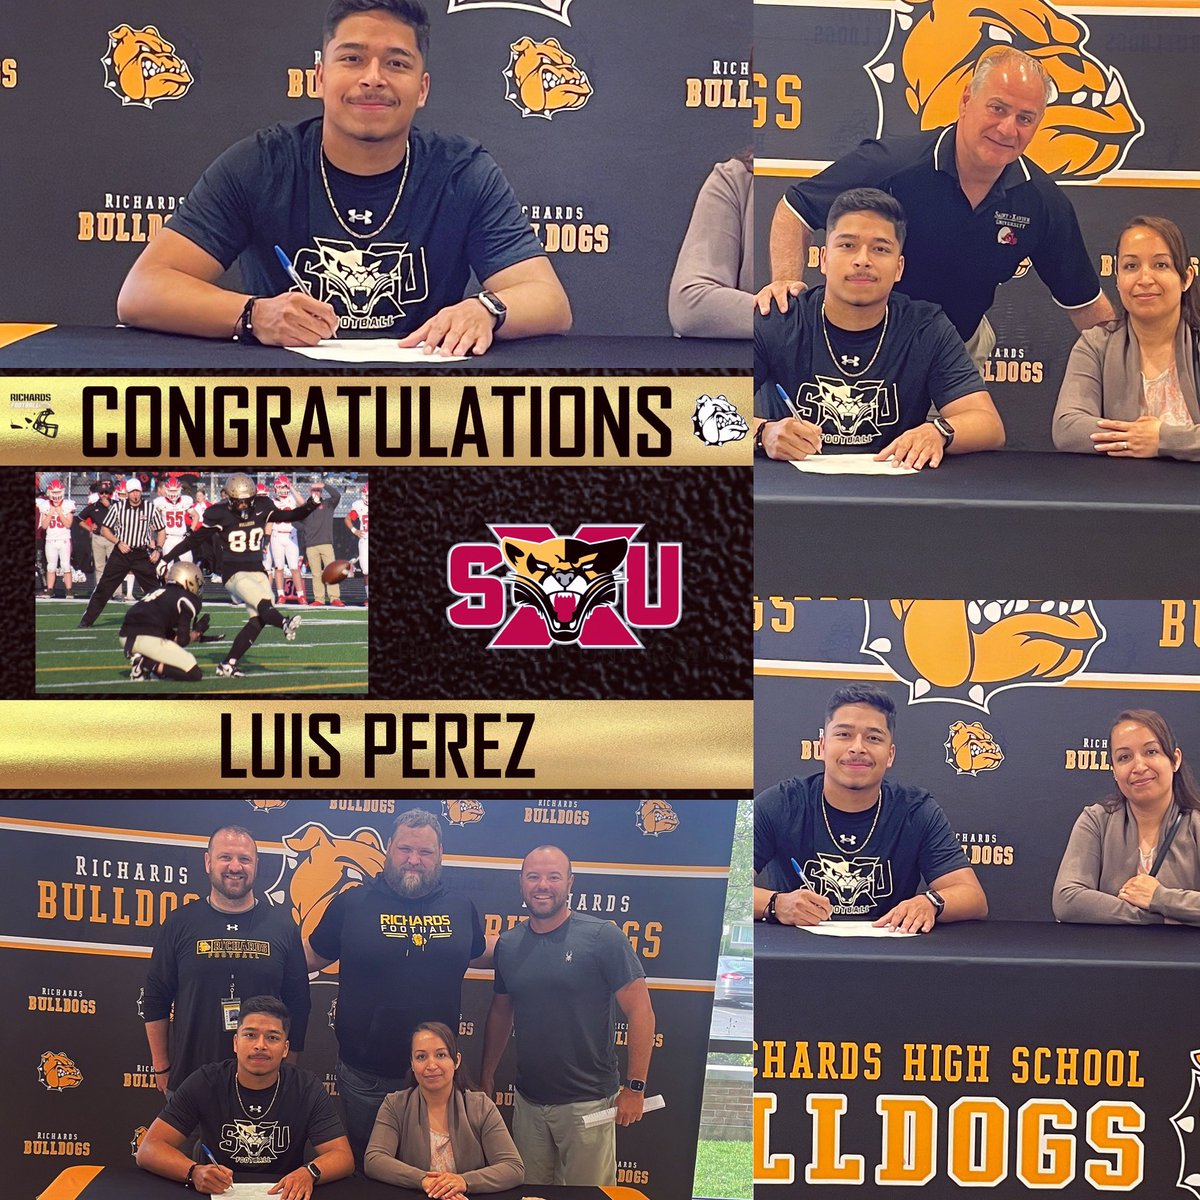 Congratulations to Senior K Luis Perez on signing his letter of intent today. Our Football program is extremely proud of you! We cannot wait to see what the future holds for you! #proudcoaches #BULLDOGTOUGH #NONEBETTER 🏈🐾🐶 @SXUFootball @Luisp2006